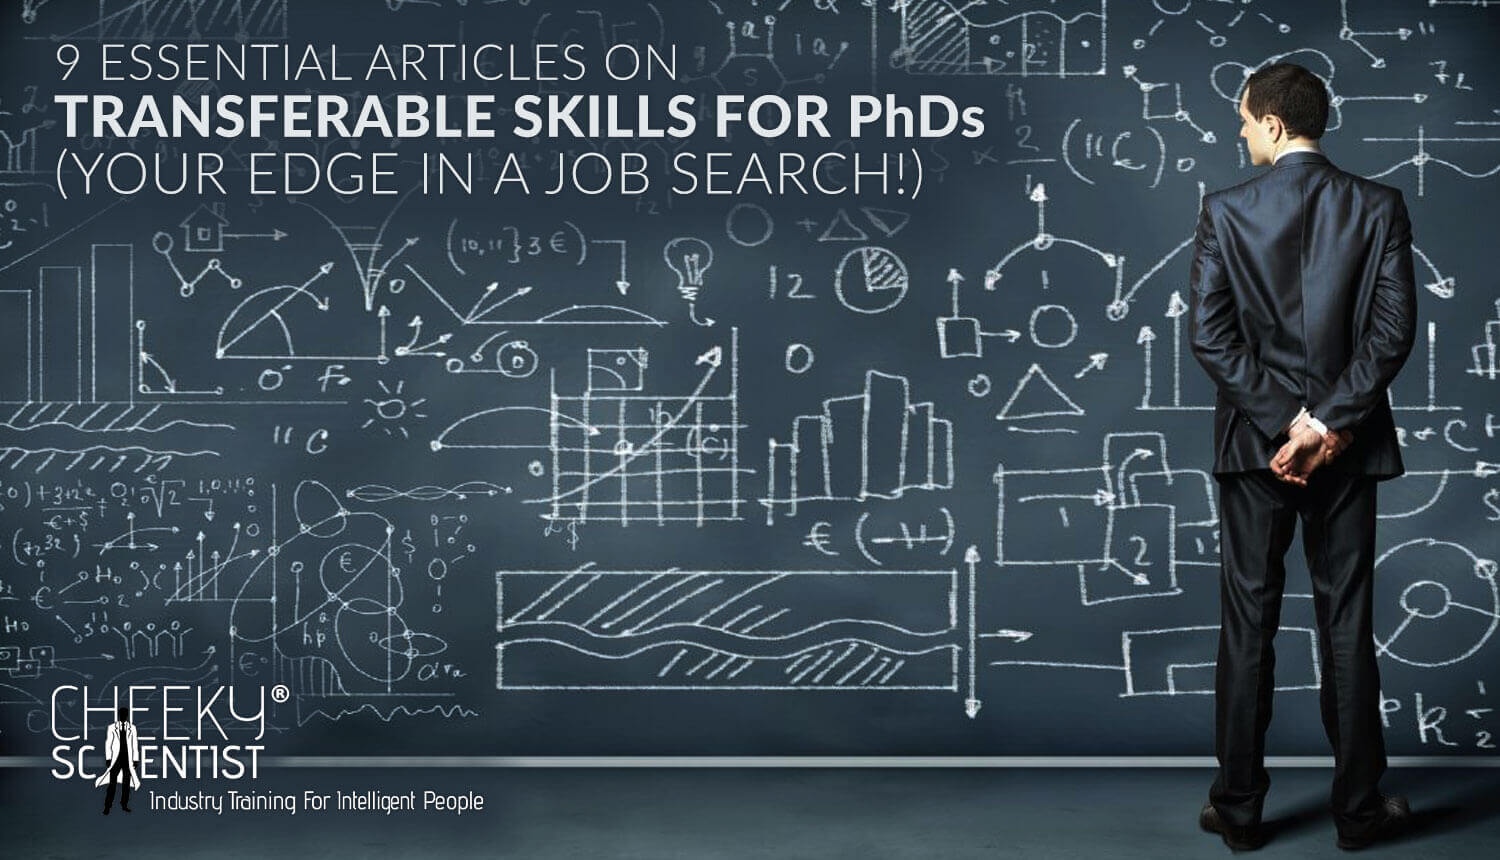 9 Essential Articles on Transferable Skills for PhDs (Your Edge In a Job Search!)